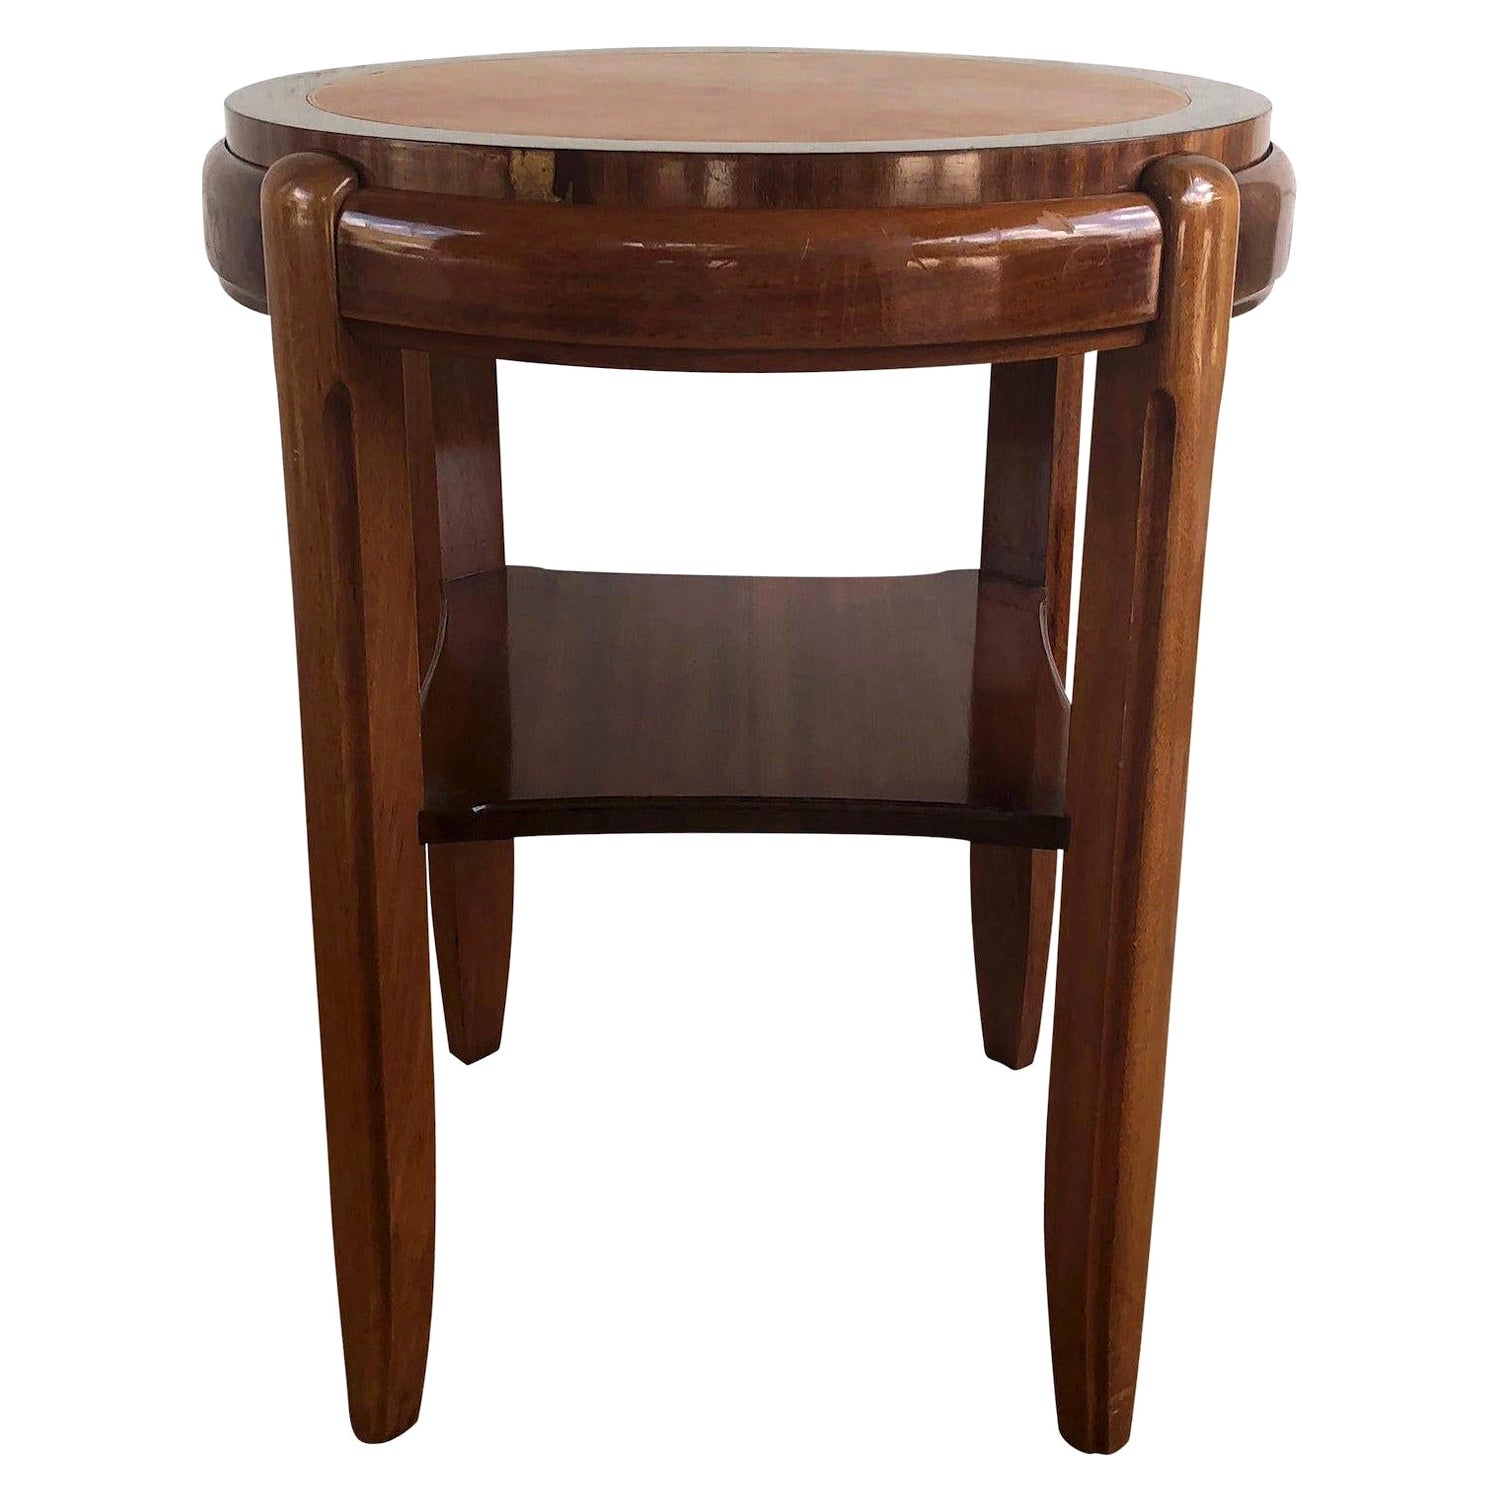 20th Century Brown Occasional Round Art Deco Side Table, Small Italian End Table